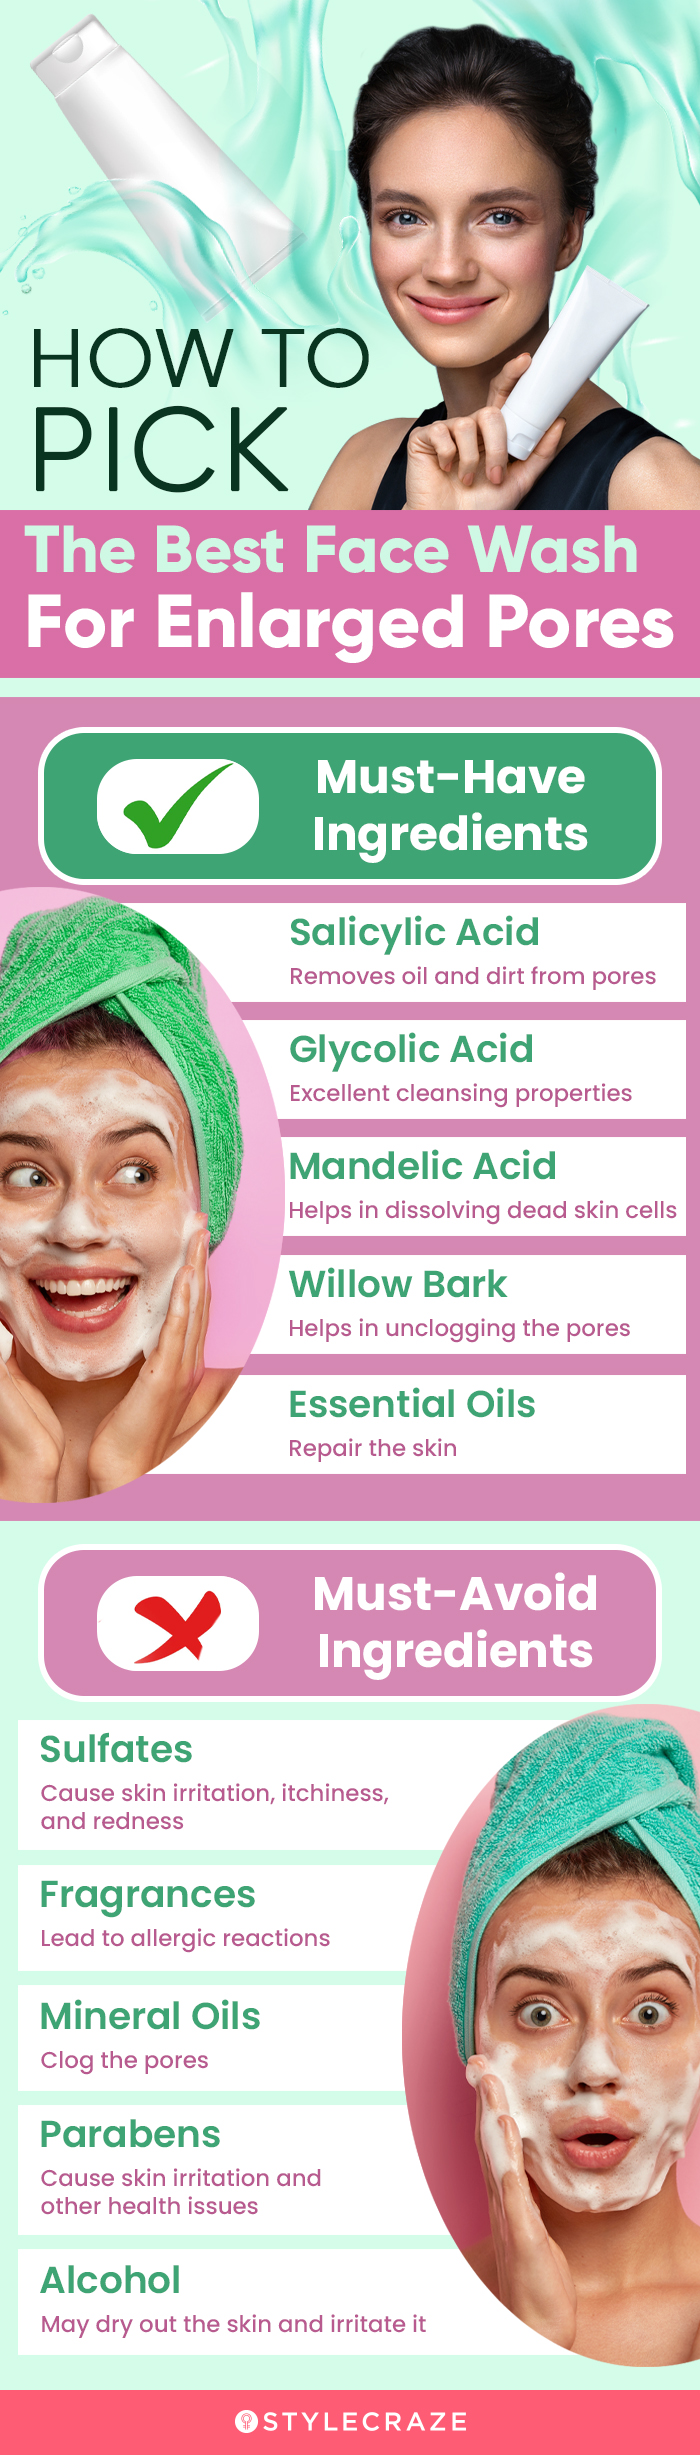 How To Pick The Best Face Wash For Enlarged Pores (infographic)